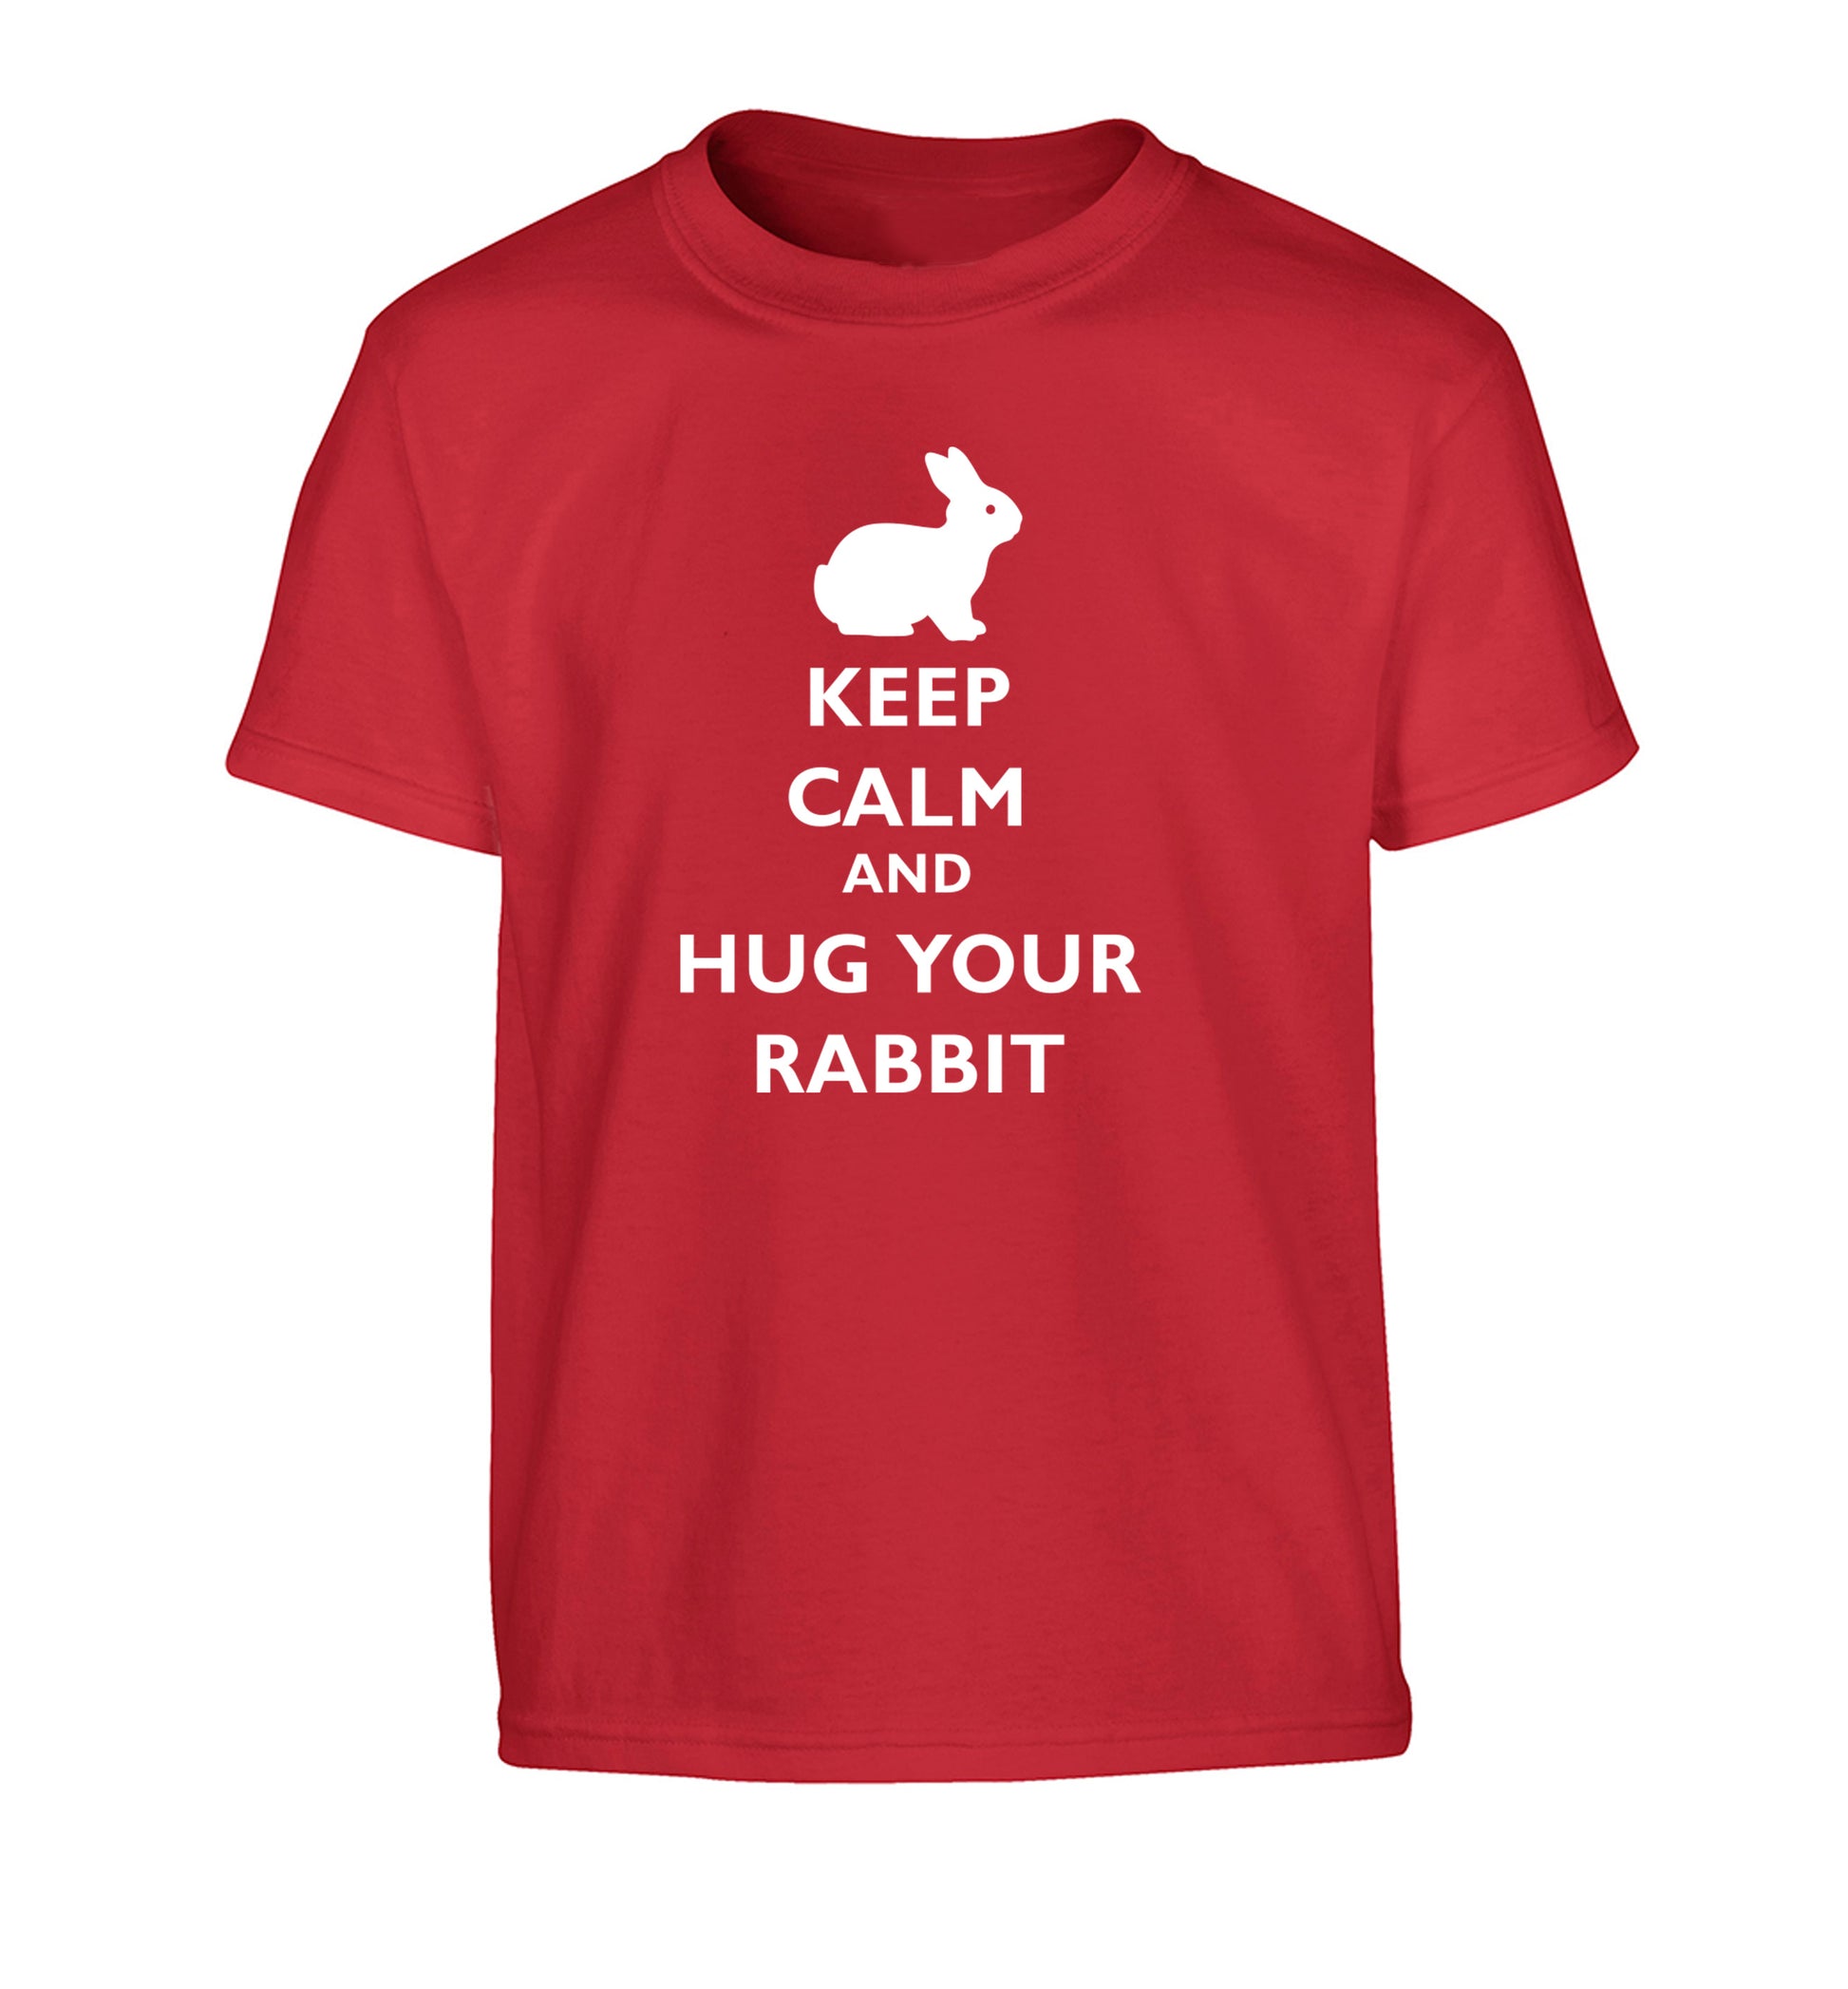 Keep calm and hug your rabbit Children's red Tshirt 12-13 Years